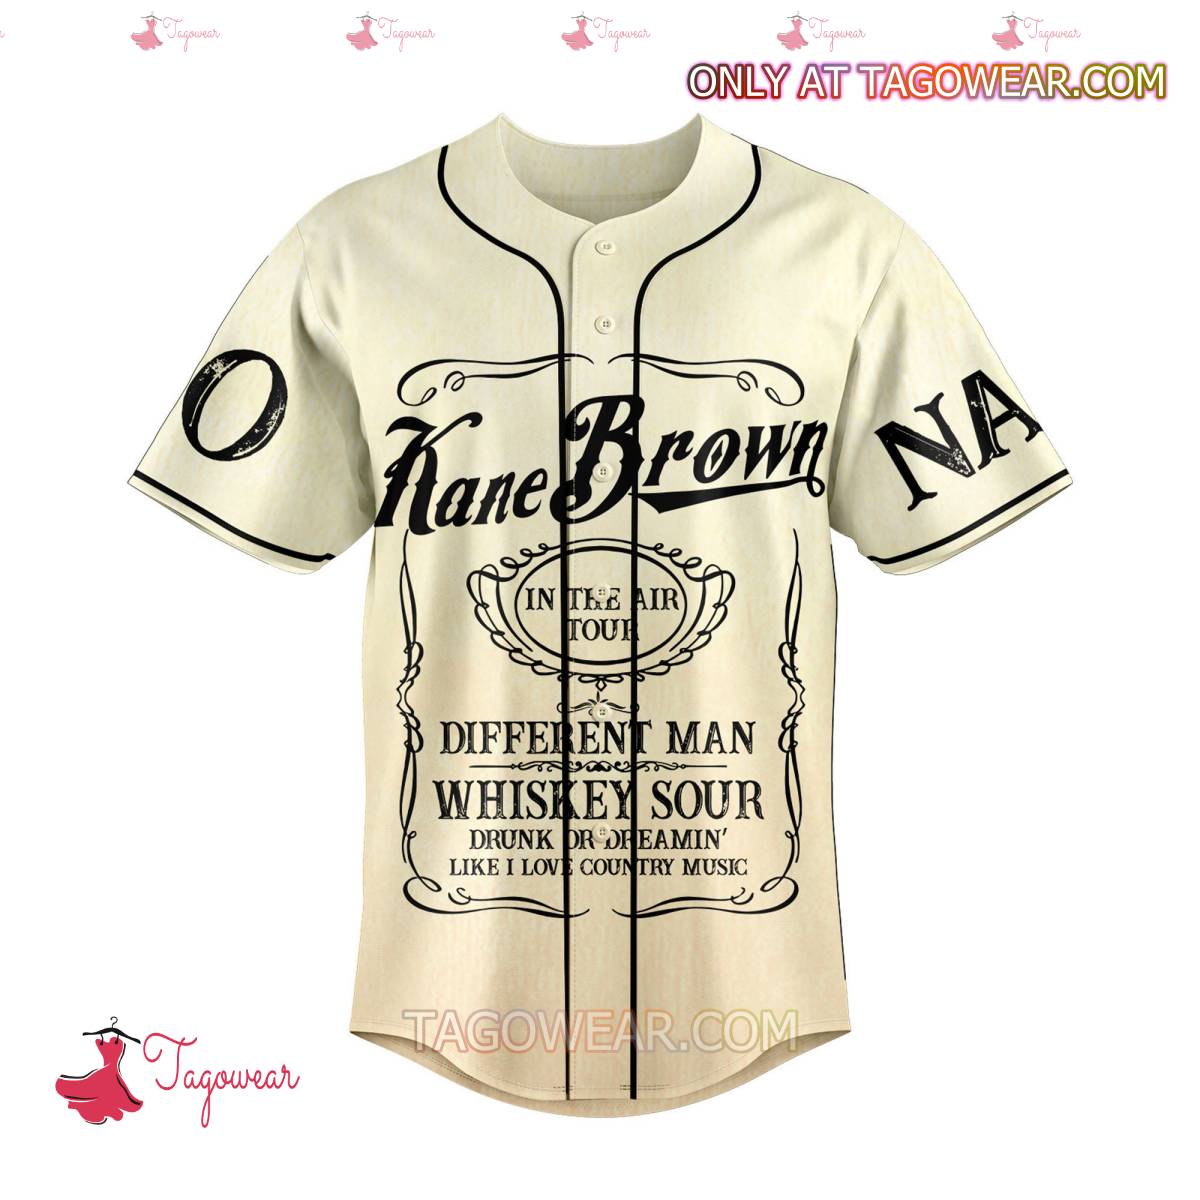 In The Air Tour Kane Brown Personalized Baseball Jersey a